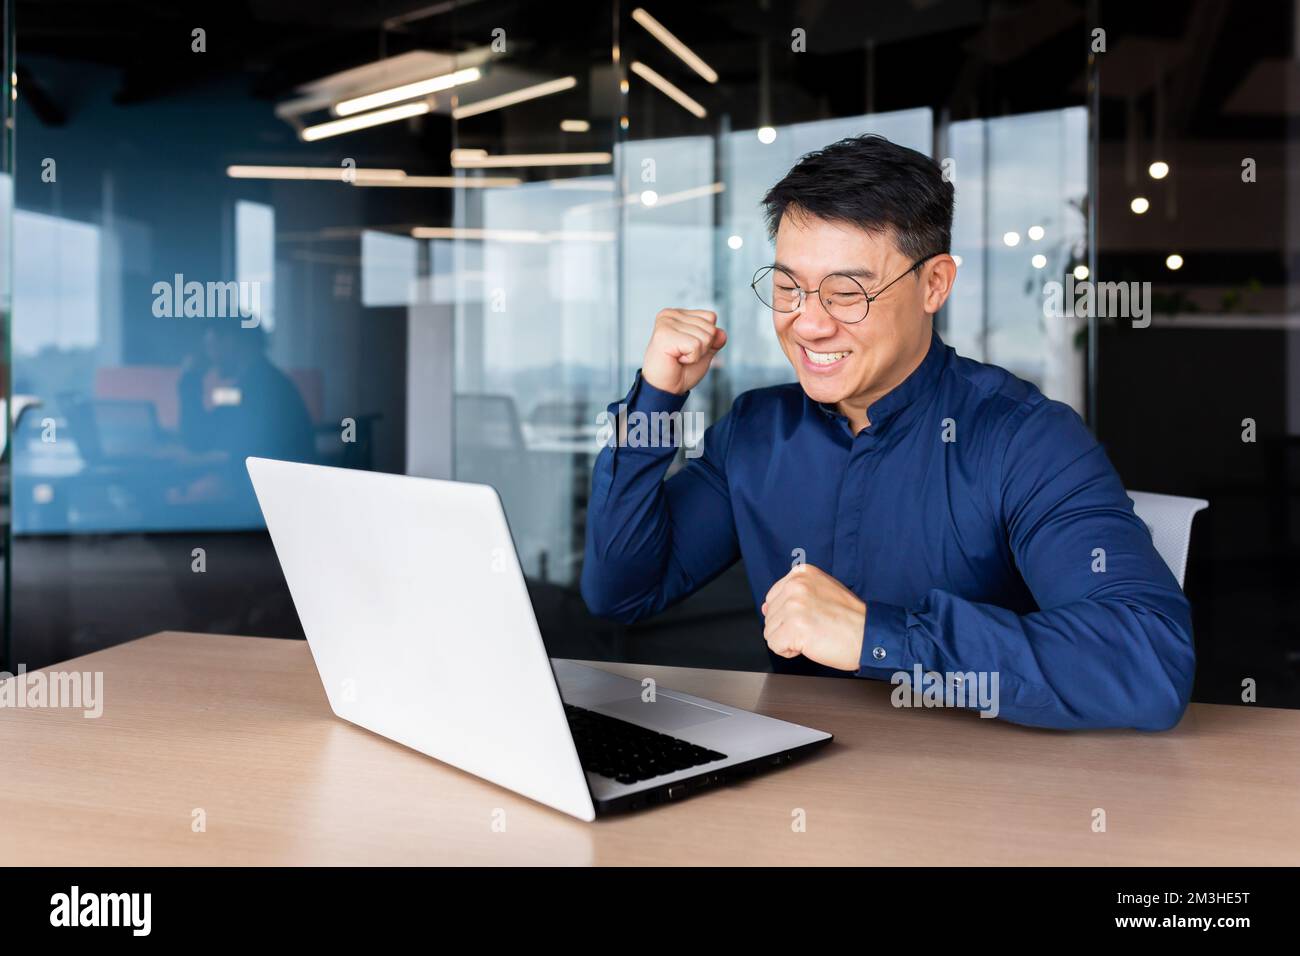 Successful asian man celebrating victory and success received news of good achievement online, businessman looking at laptop screen and holding hand up triumph gesture, worker inside office. Stock Photo